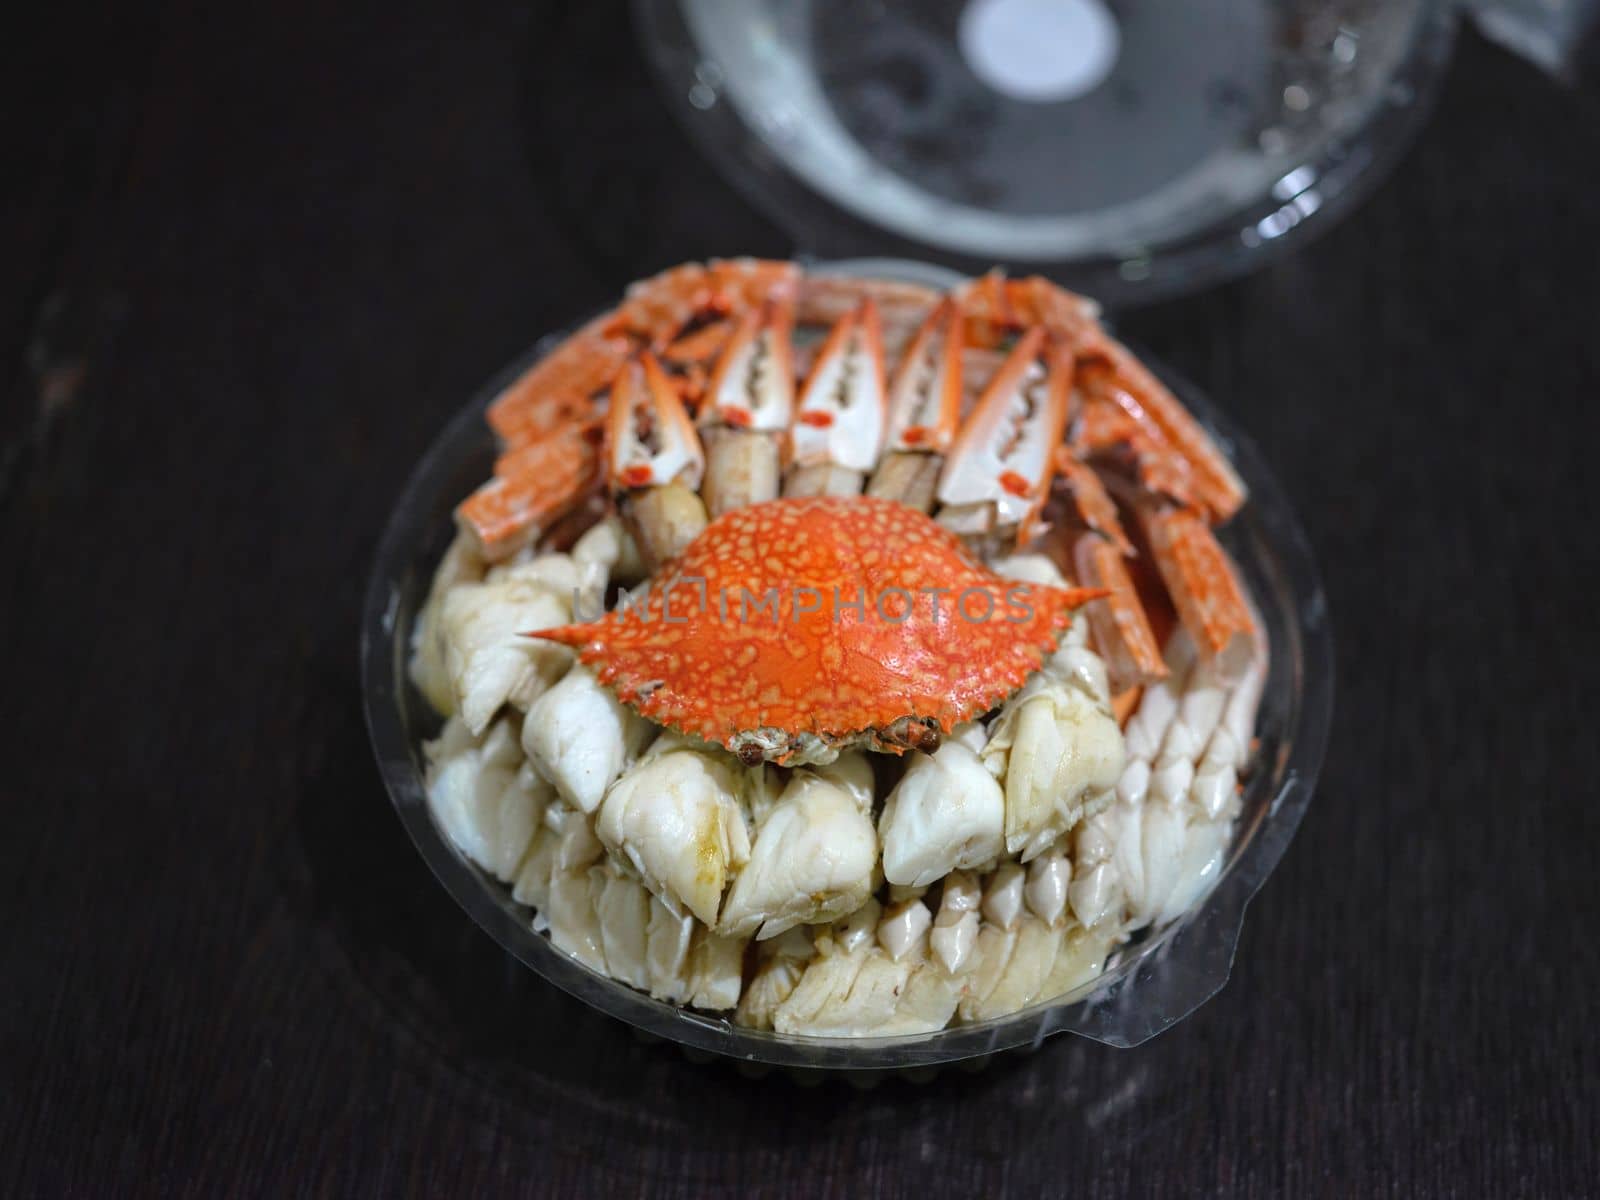 Steamed crab meat from blue crab by Hepjam